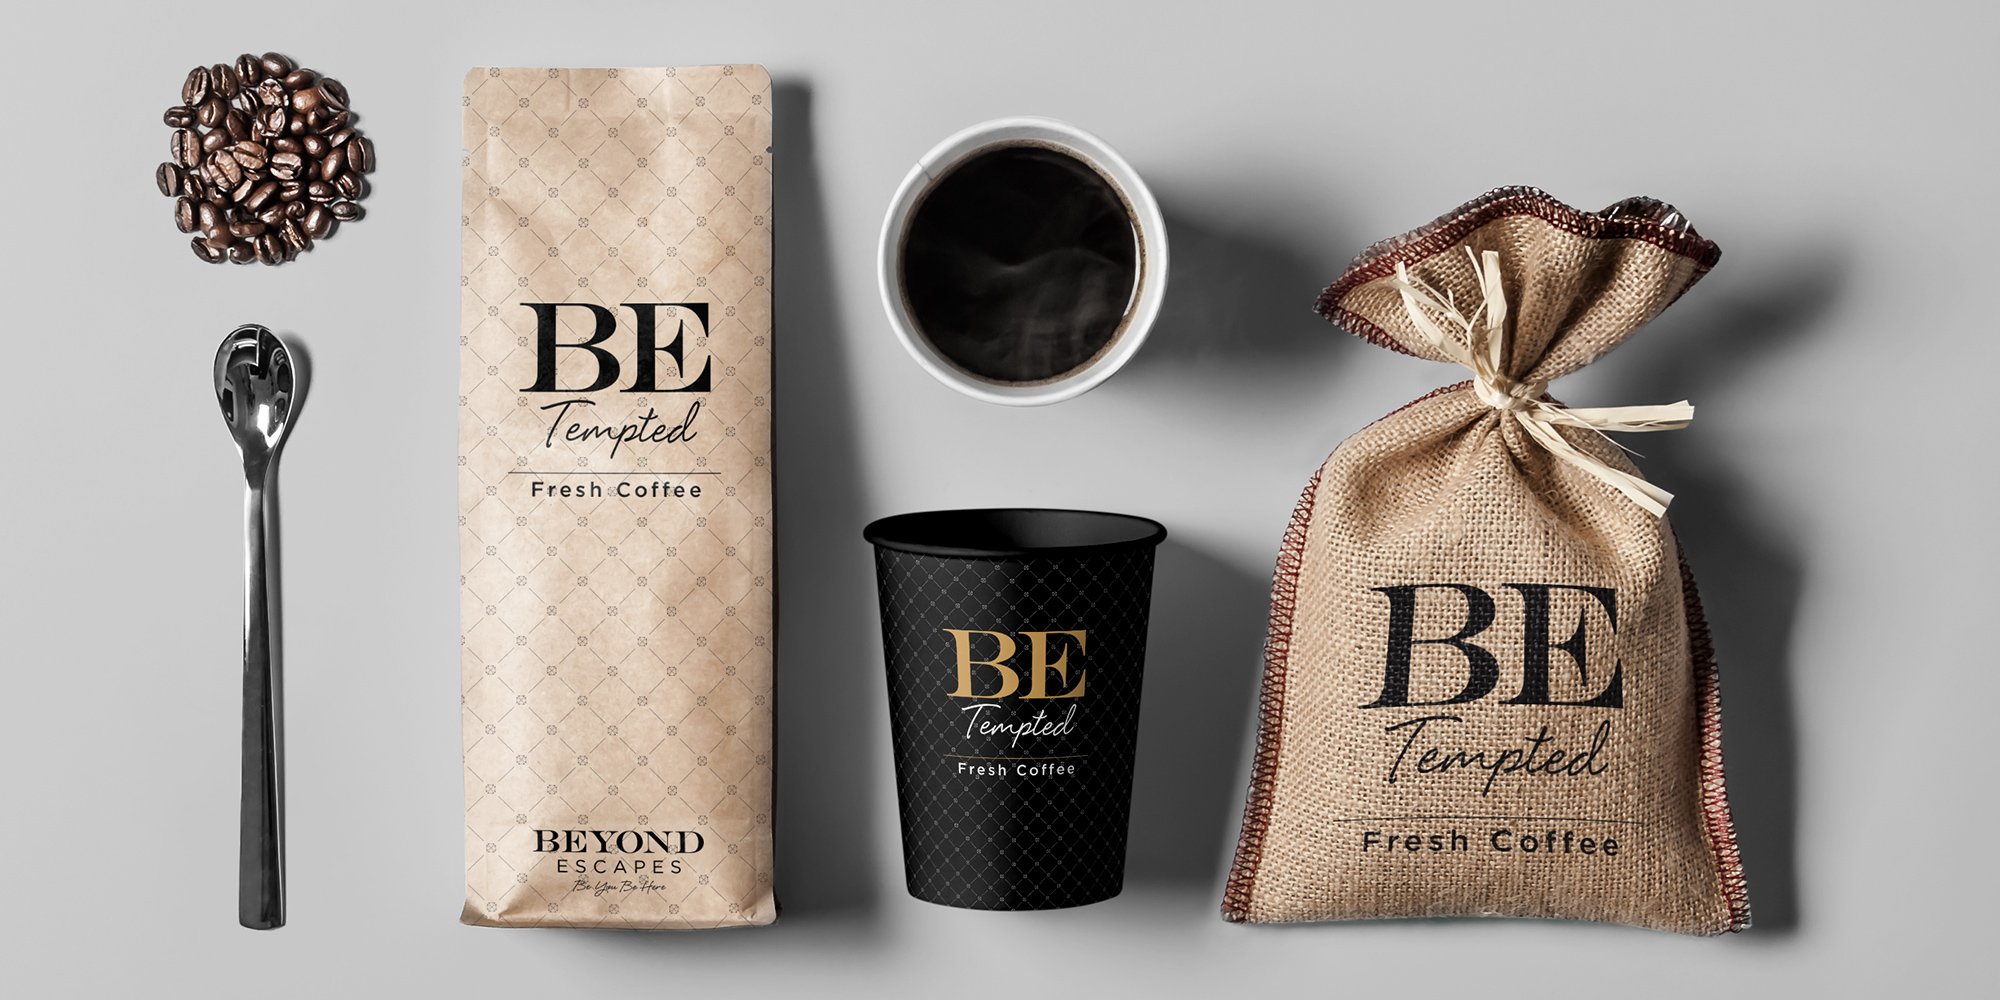 BE-Tempted Coffee